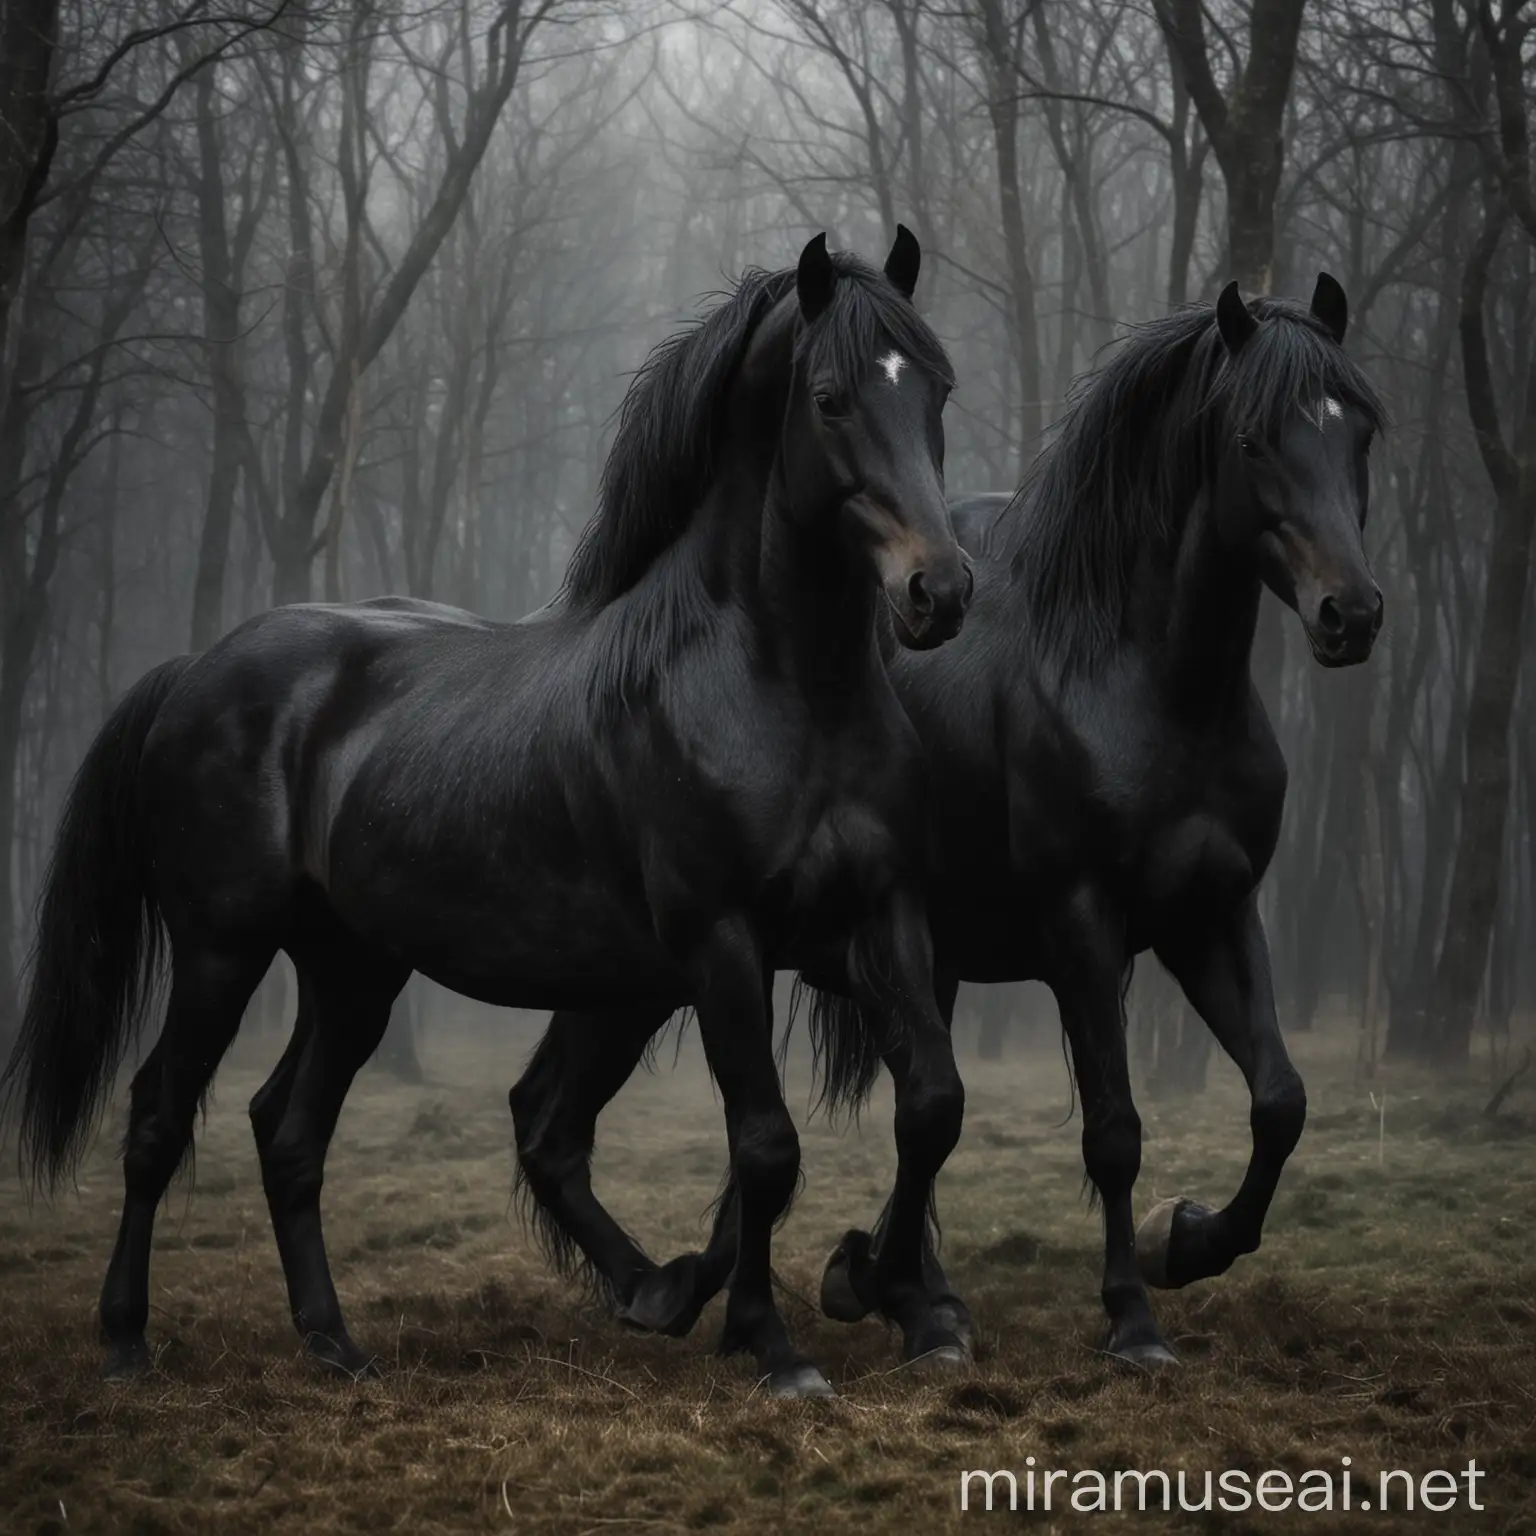 Majestic Black Horses Galloping Through Moonlit Forest